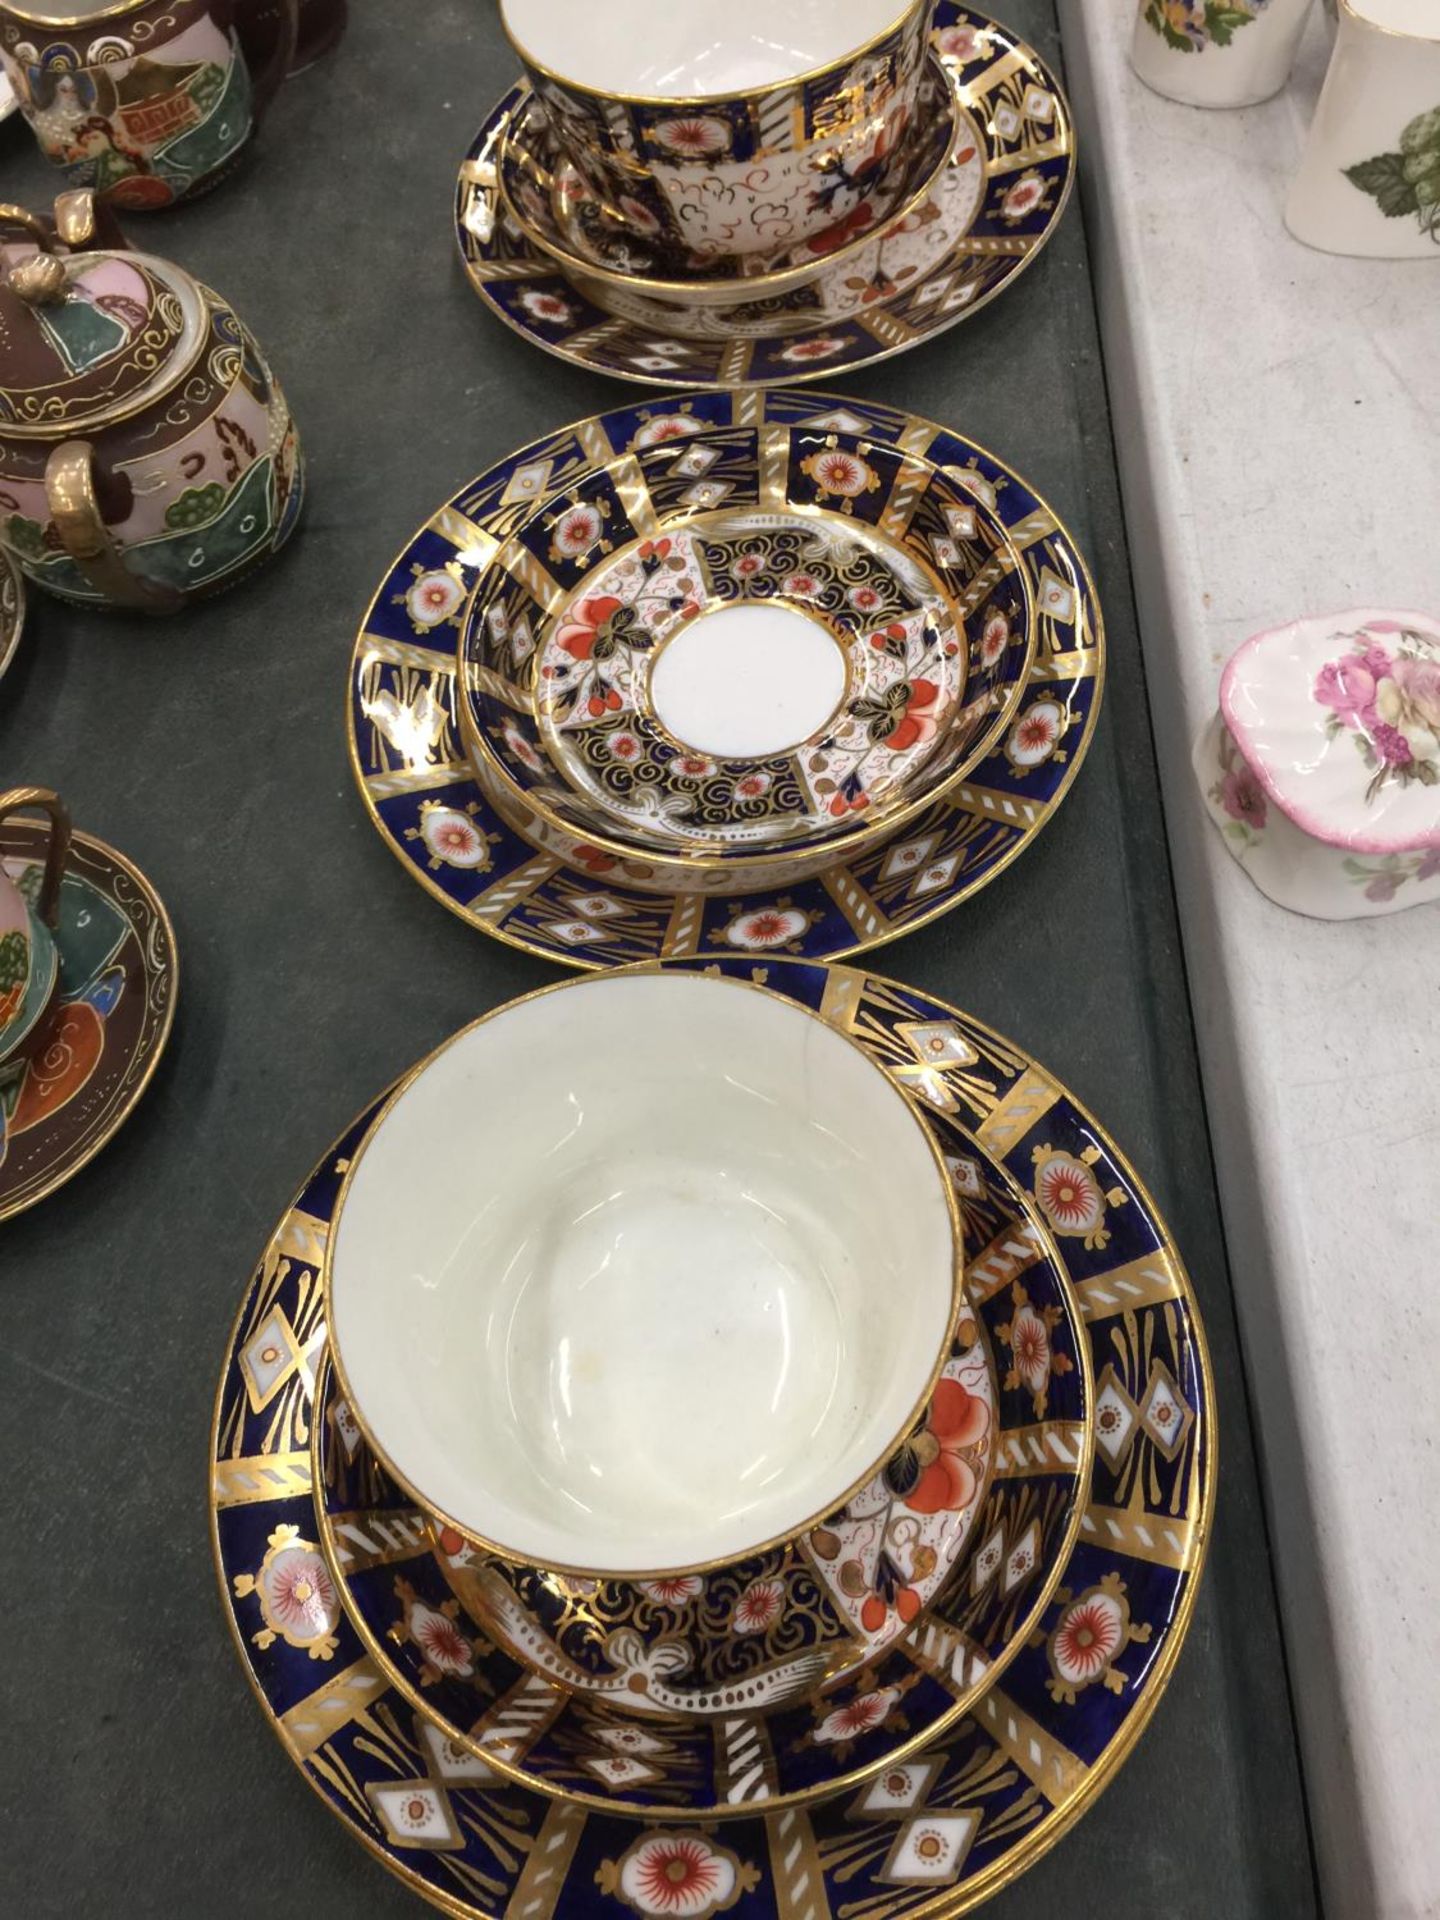 A QUANTITY OF VINTAGE POINTONS CHINA TO INCLUDE A CAKE PLATE, PLATES, SAUCERS, A CREAM JUG AND SUGAR - Image 7 of 8